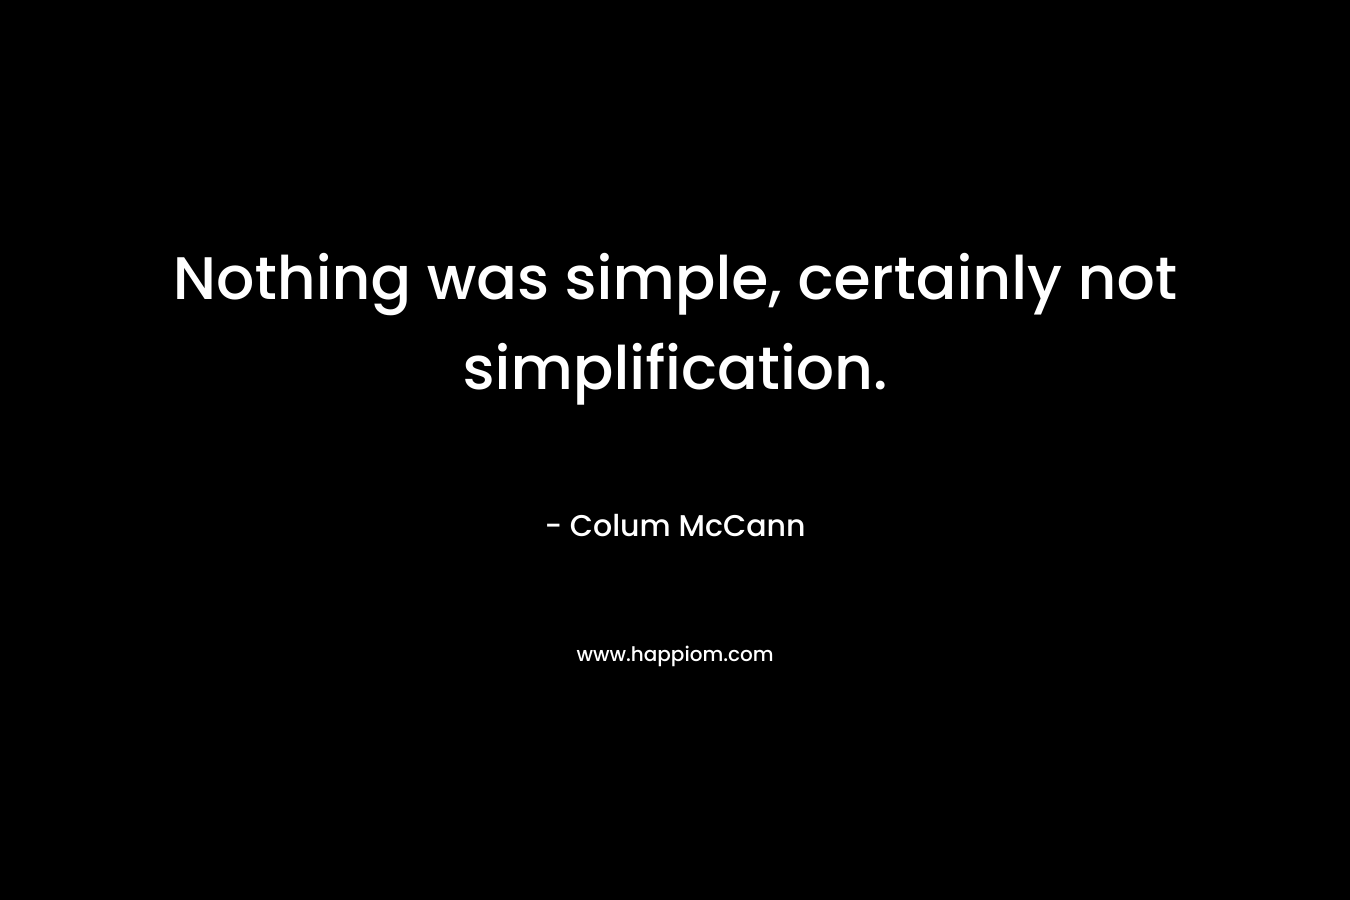 Nothing was simple, certainly not simplification. – Colum McCann